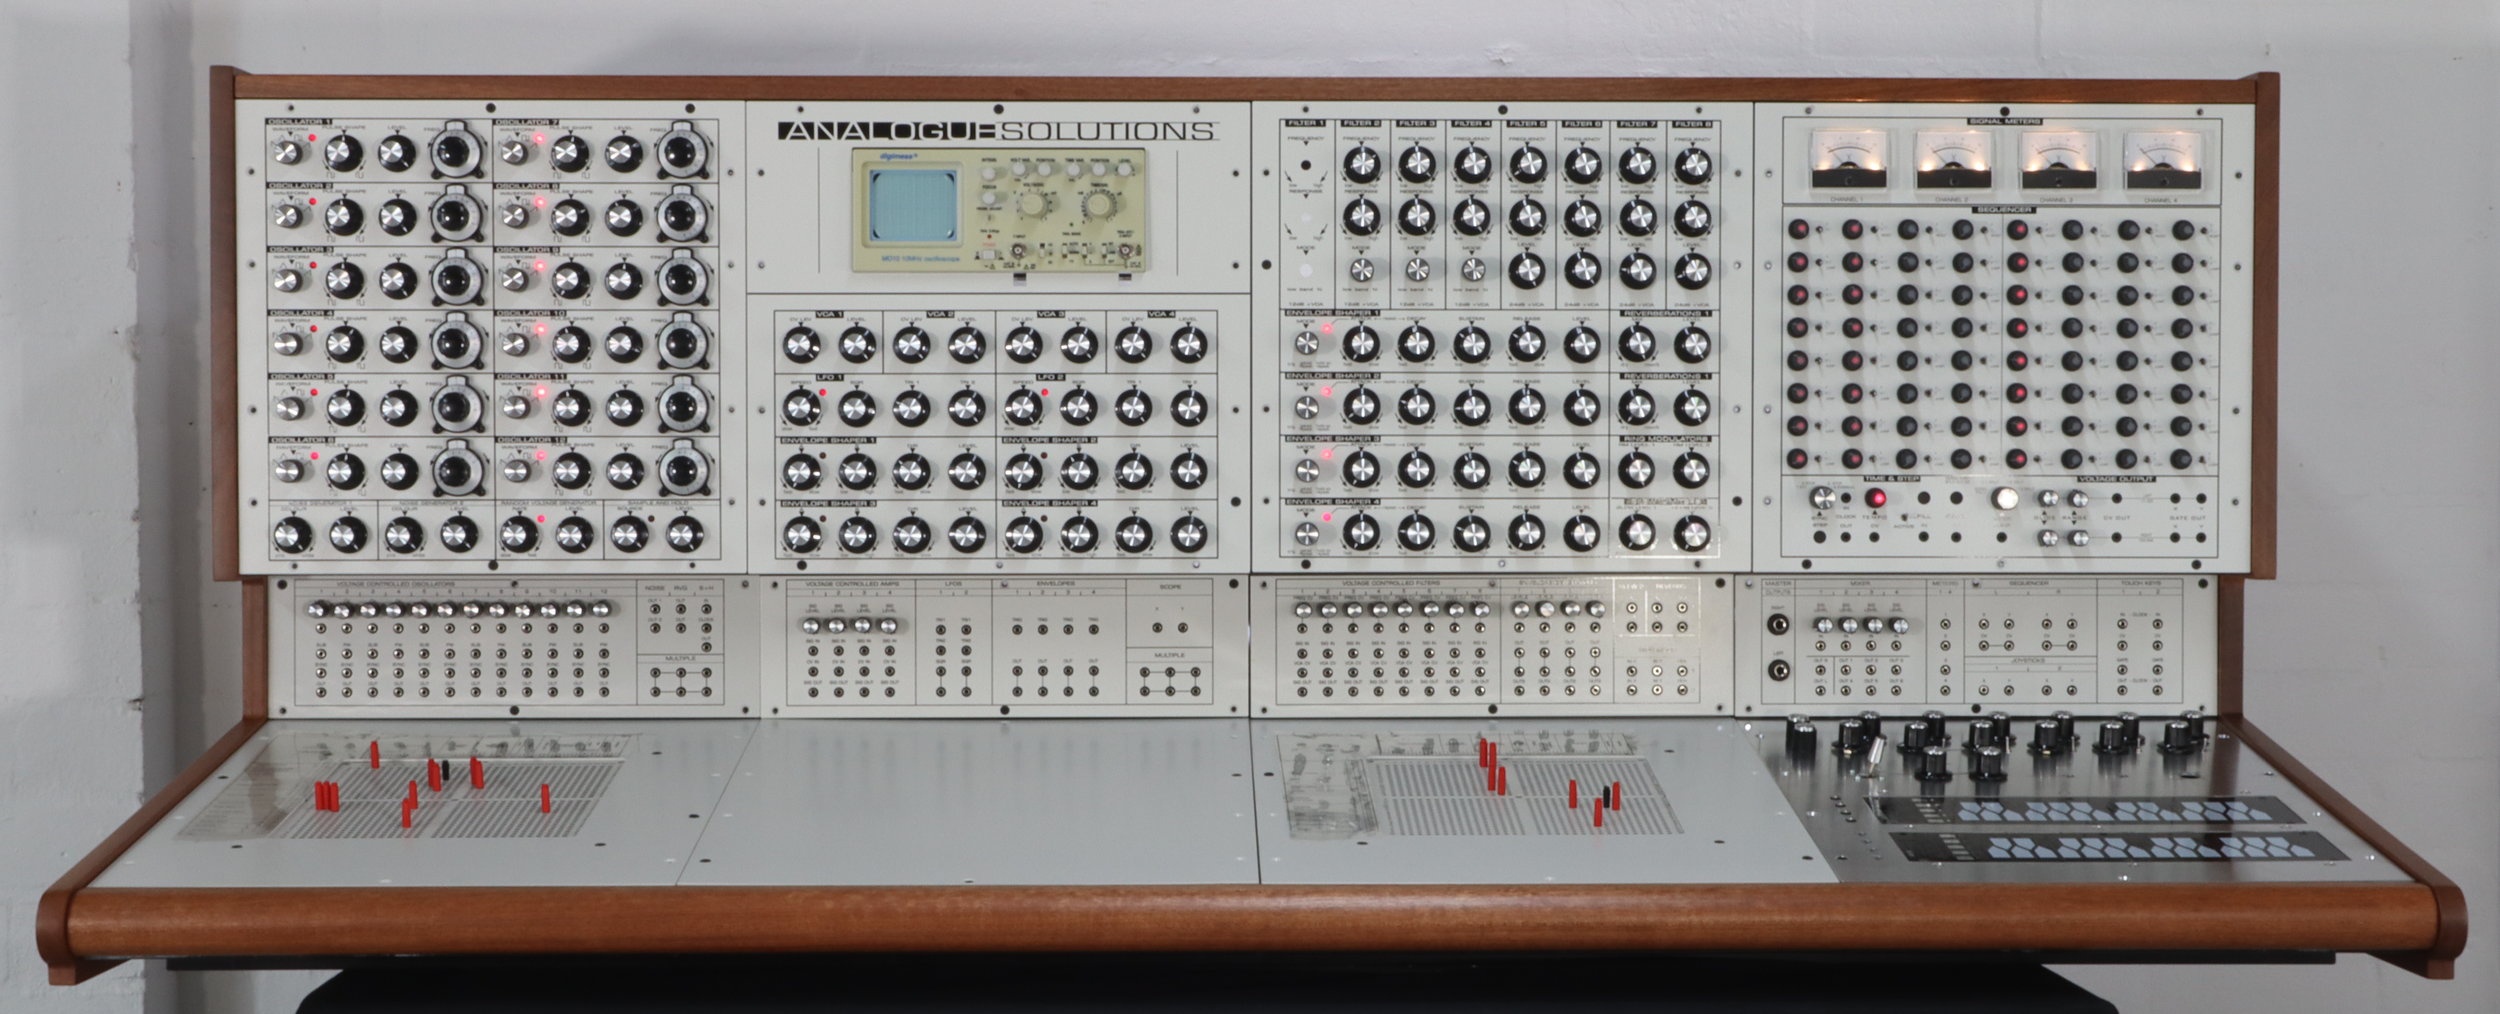 analogue-solutions-colossus-281305.jpg